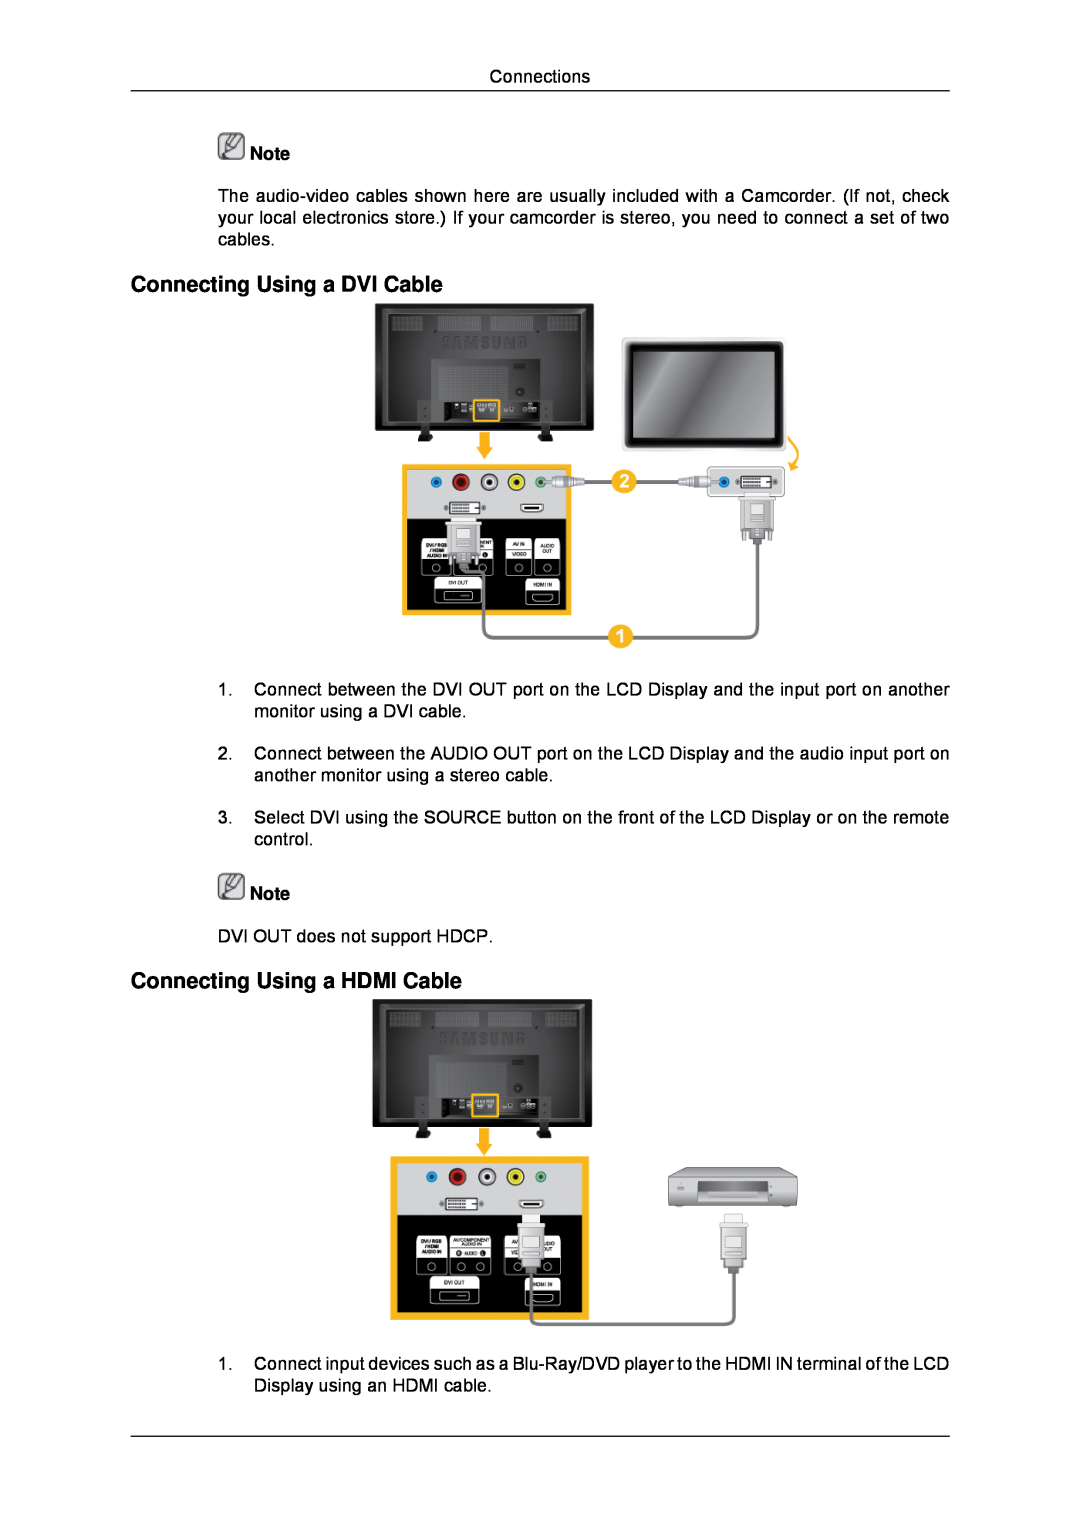 Samsung LH70TCUMBG/XJ, LH70TCUMBG/EN, LH82TCUMBG/EN manual Connecting Using a DVI Cable, Connecting Using a HDMI Cable 